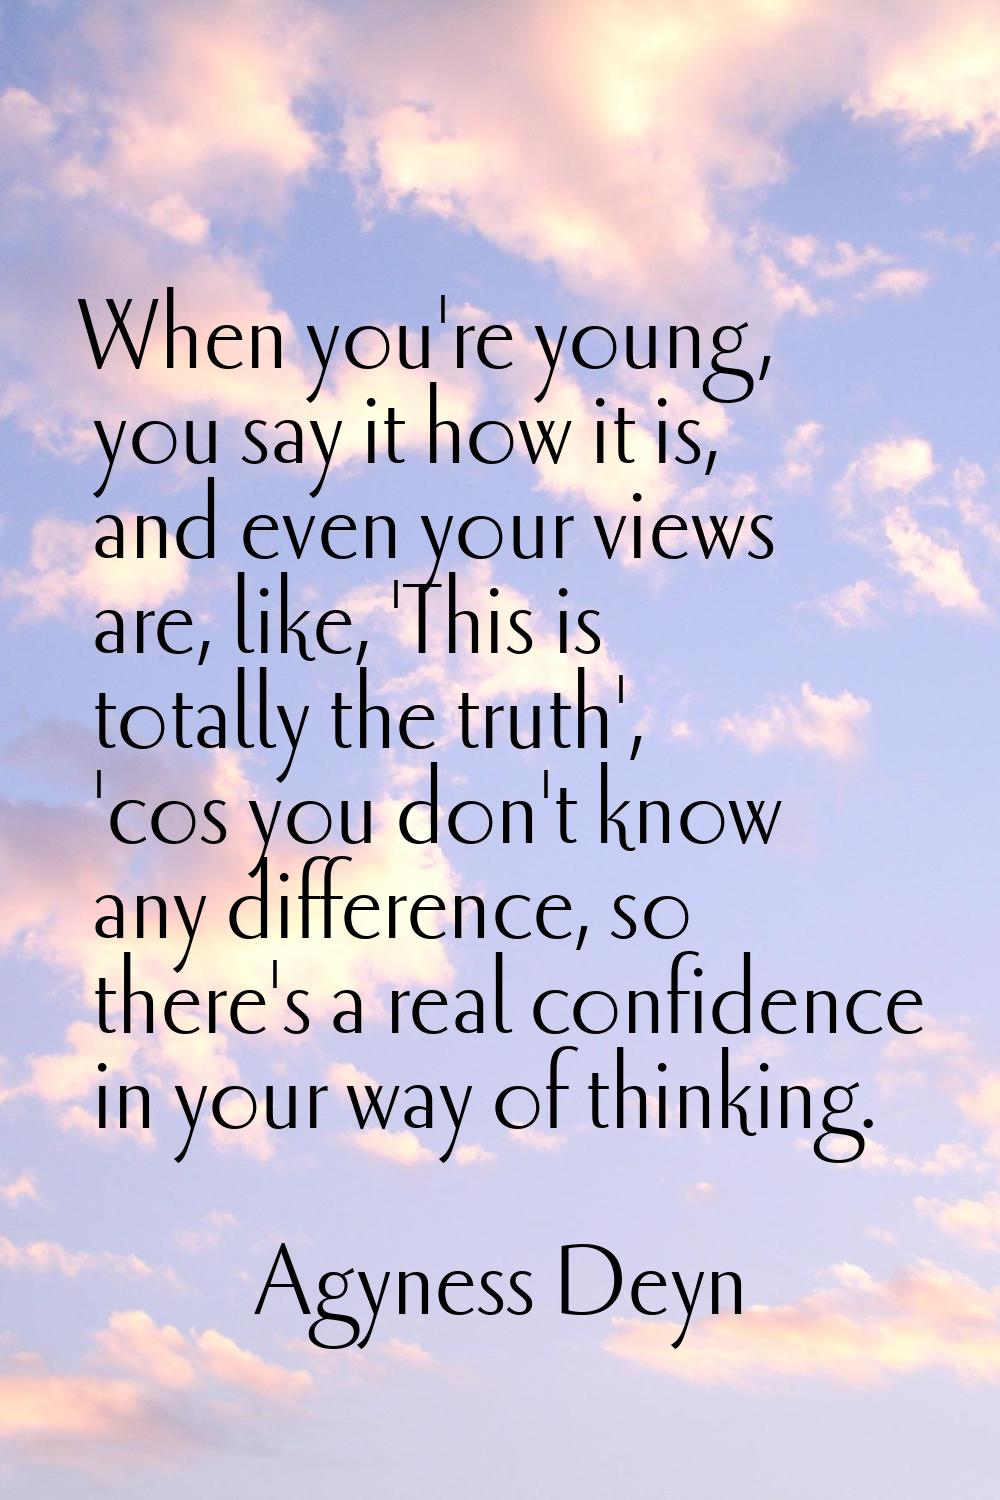 When you're young, you say it how it is, and even your views are, like, 'This is totally the truth'